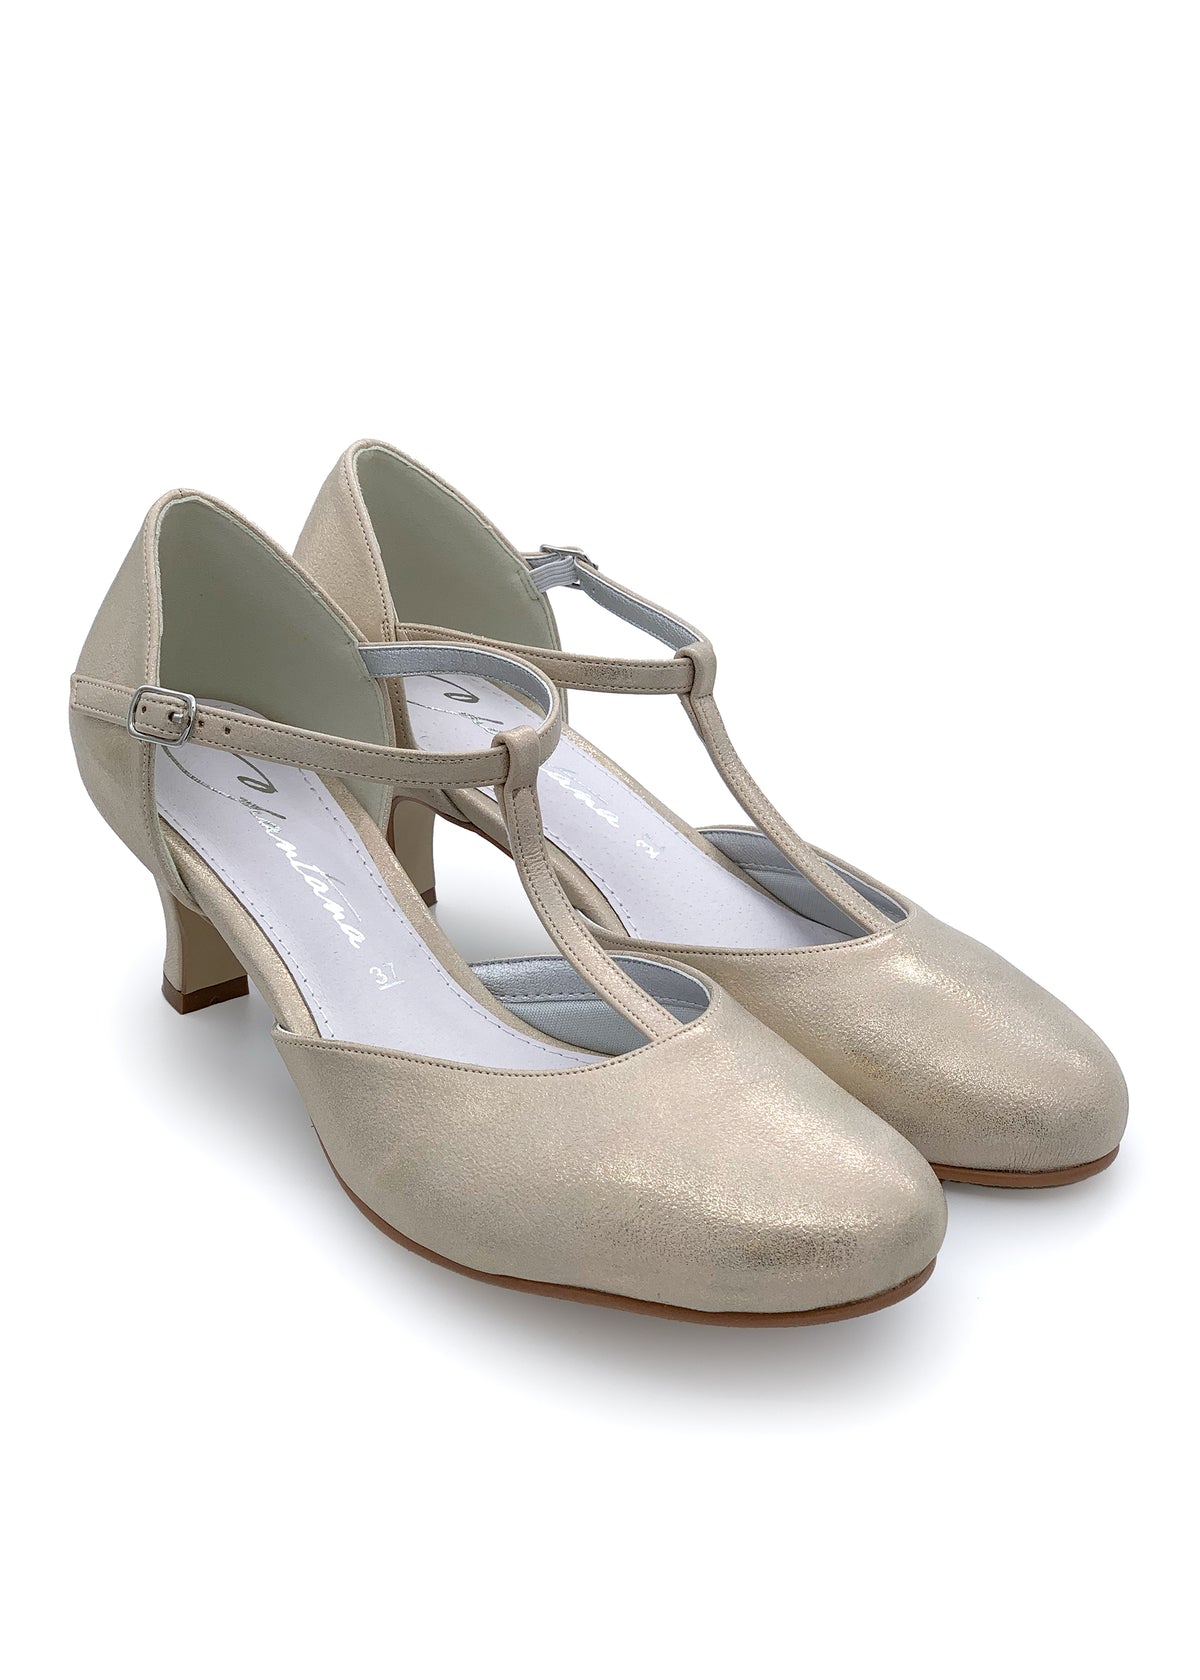 Open-toed shoes with ankle straps - sparkling gold